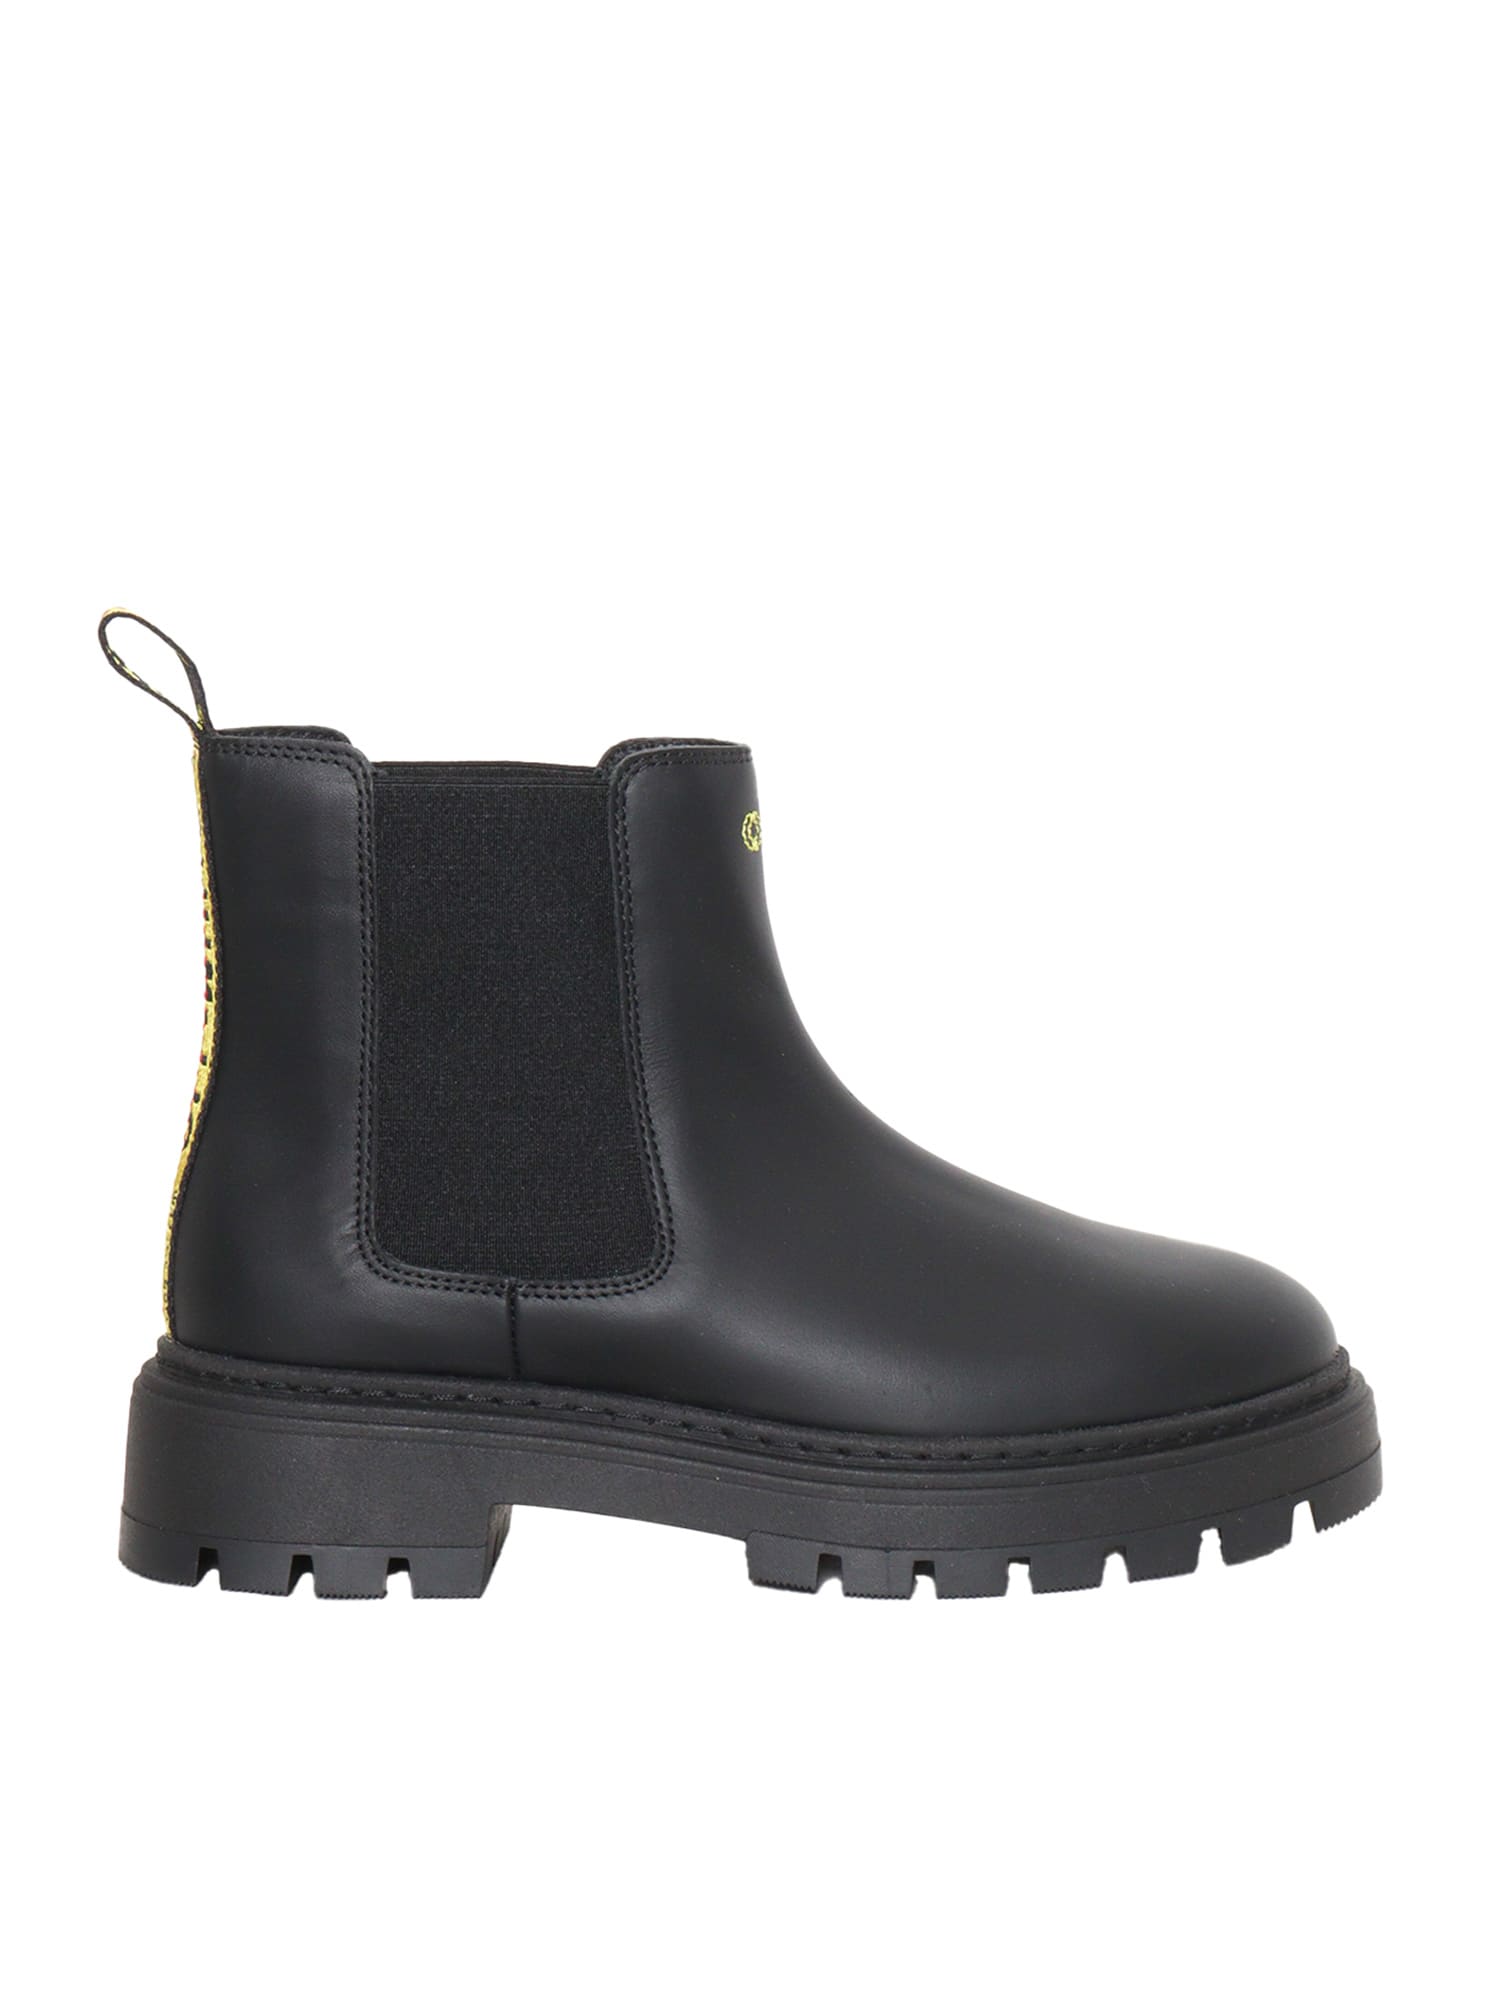 Off-White Chelsea Boots